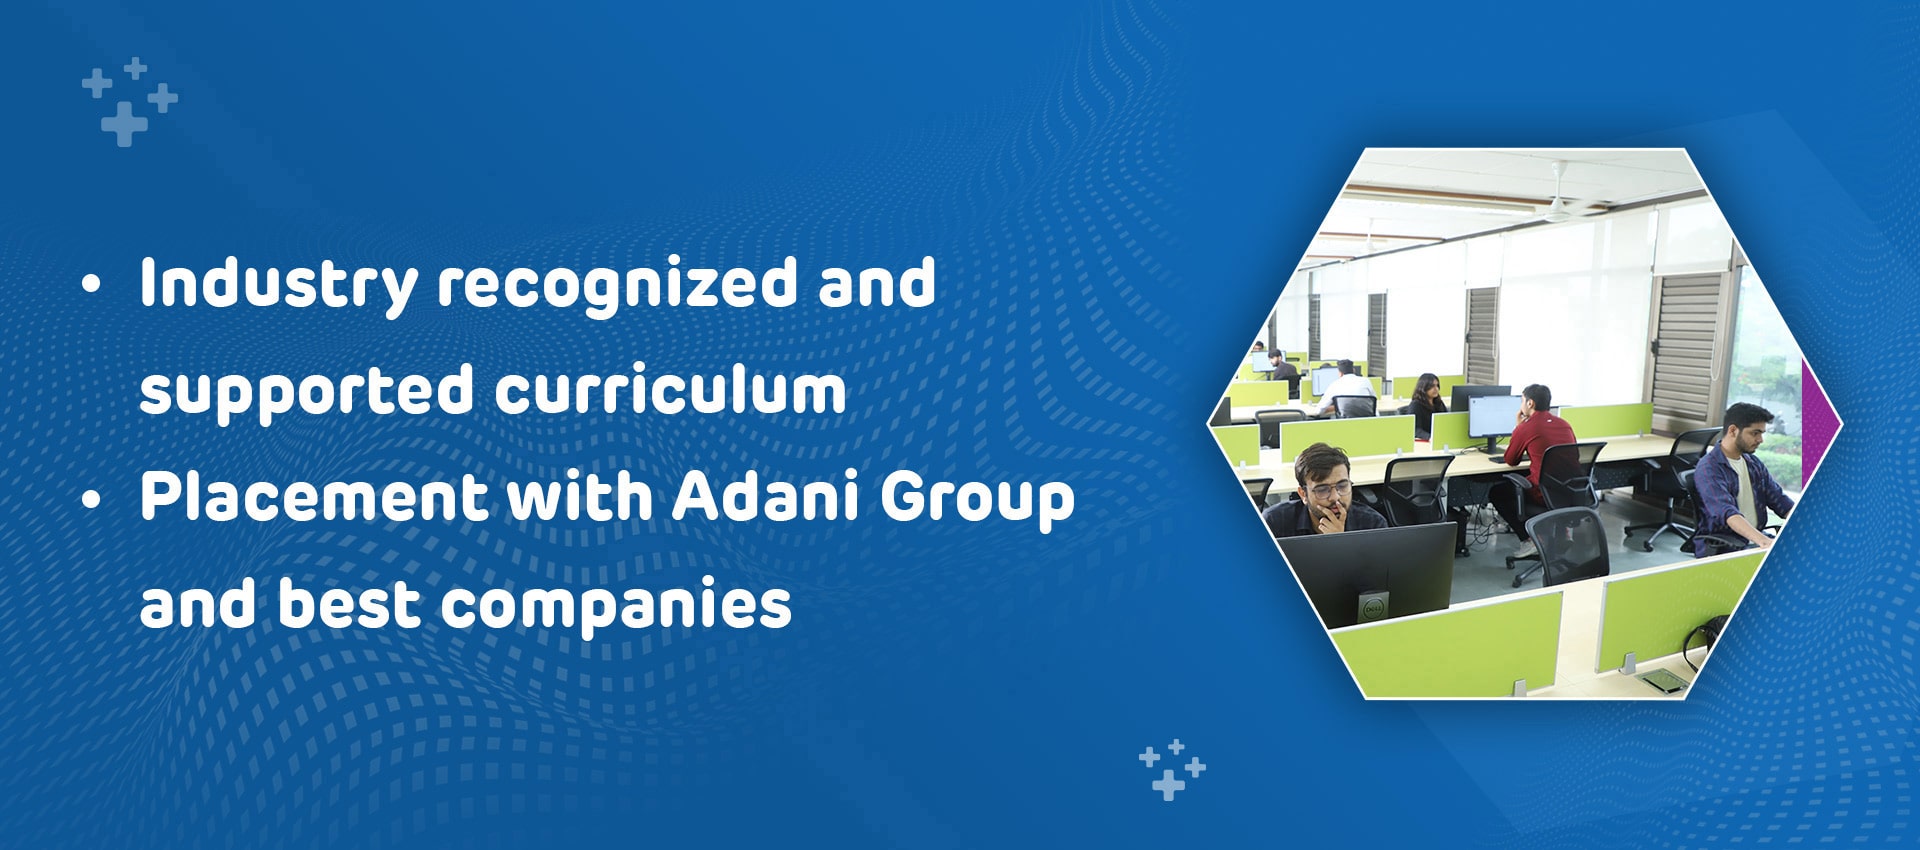 Placement with Adani Group and best companies